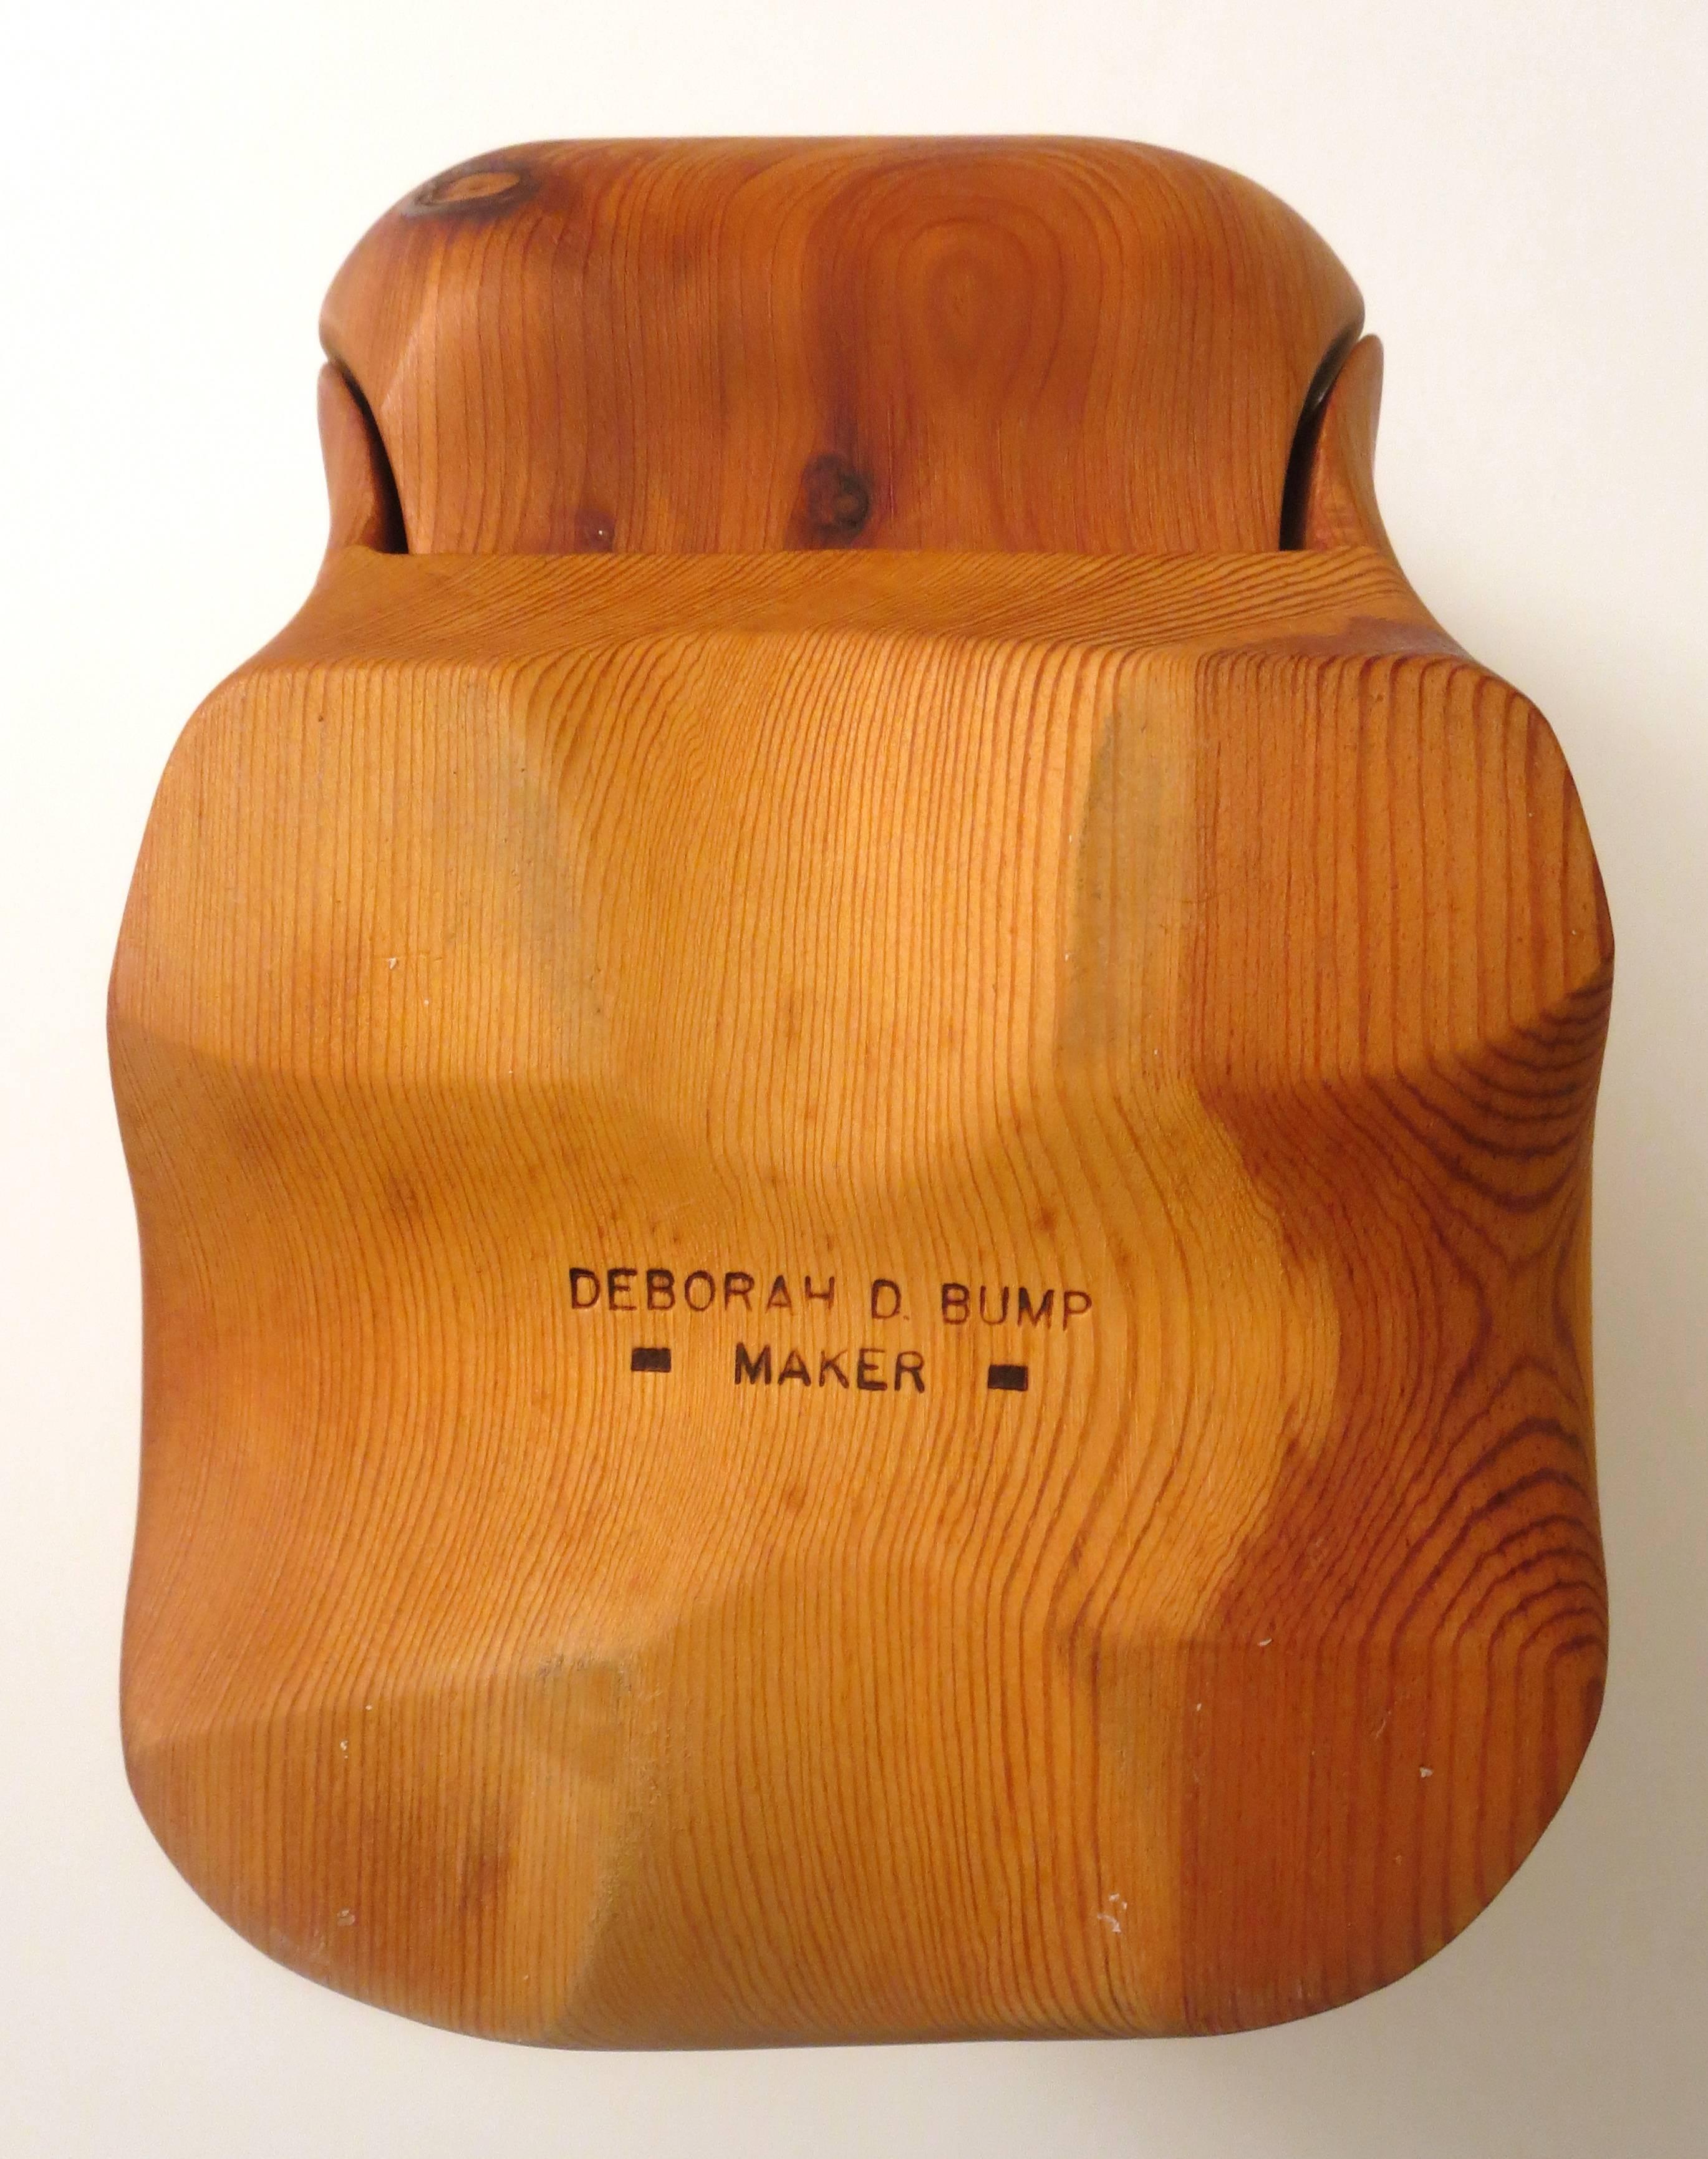 20th Century Solid Figural Hippo Cedar and Pine Wood Jewelry Box by Deborah D Bump